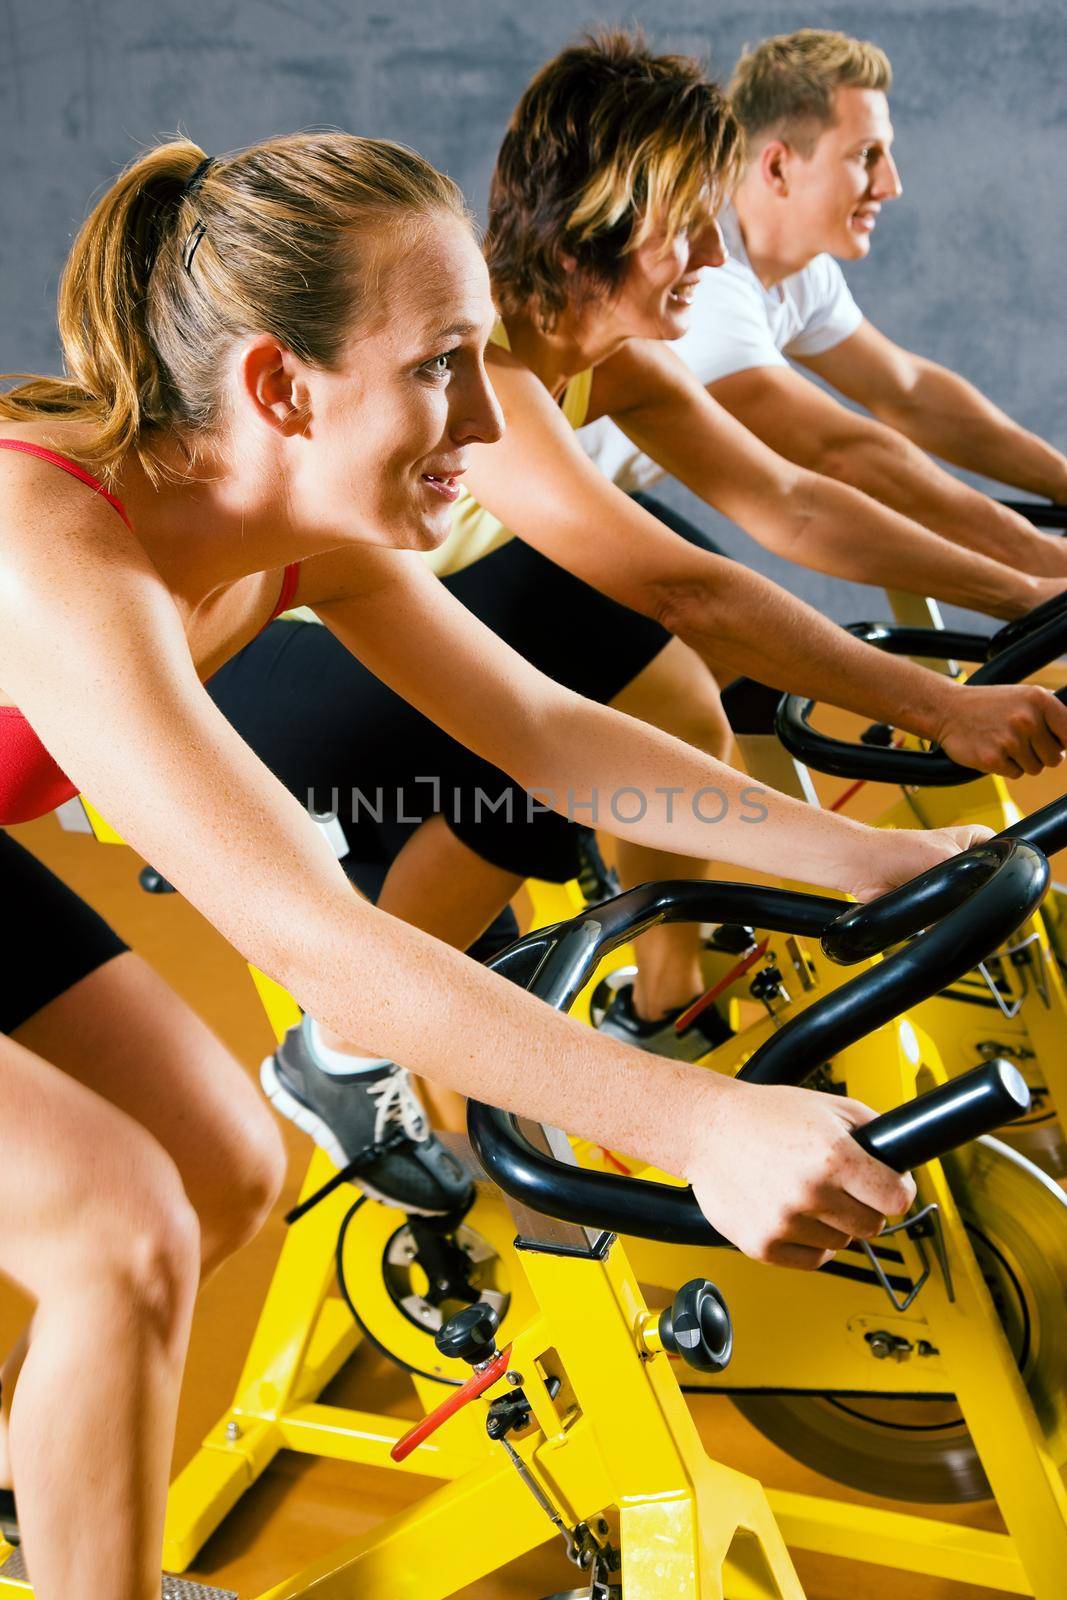 Three people spinning on bicycles in a gym or fitness club for a workout